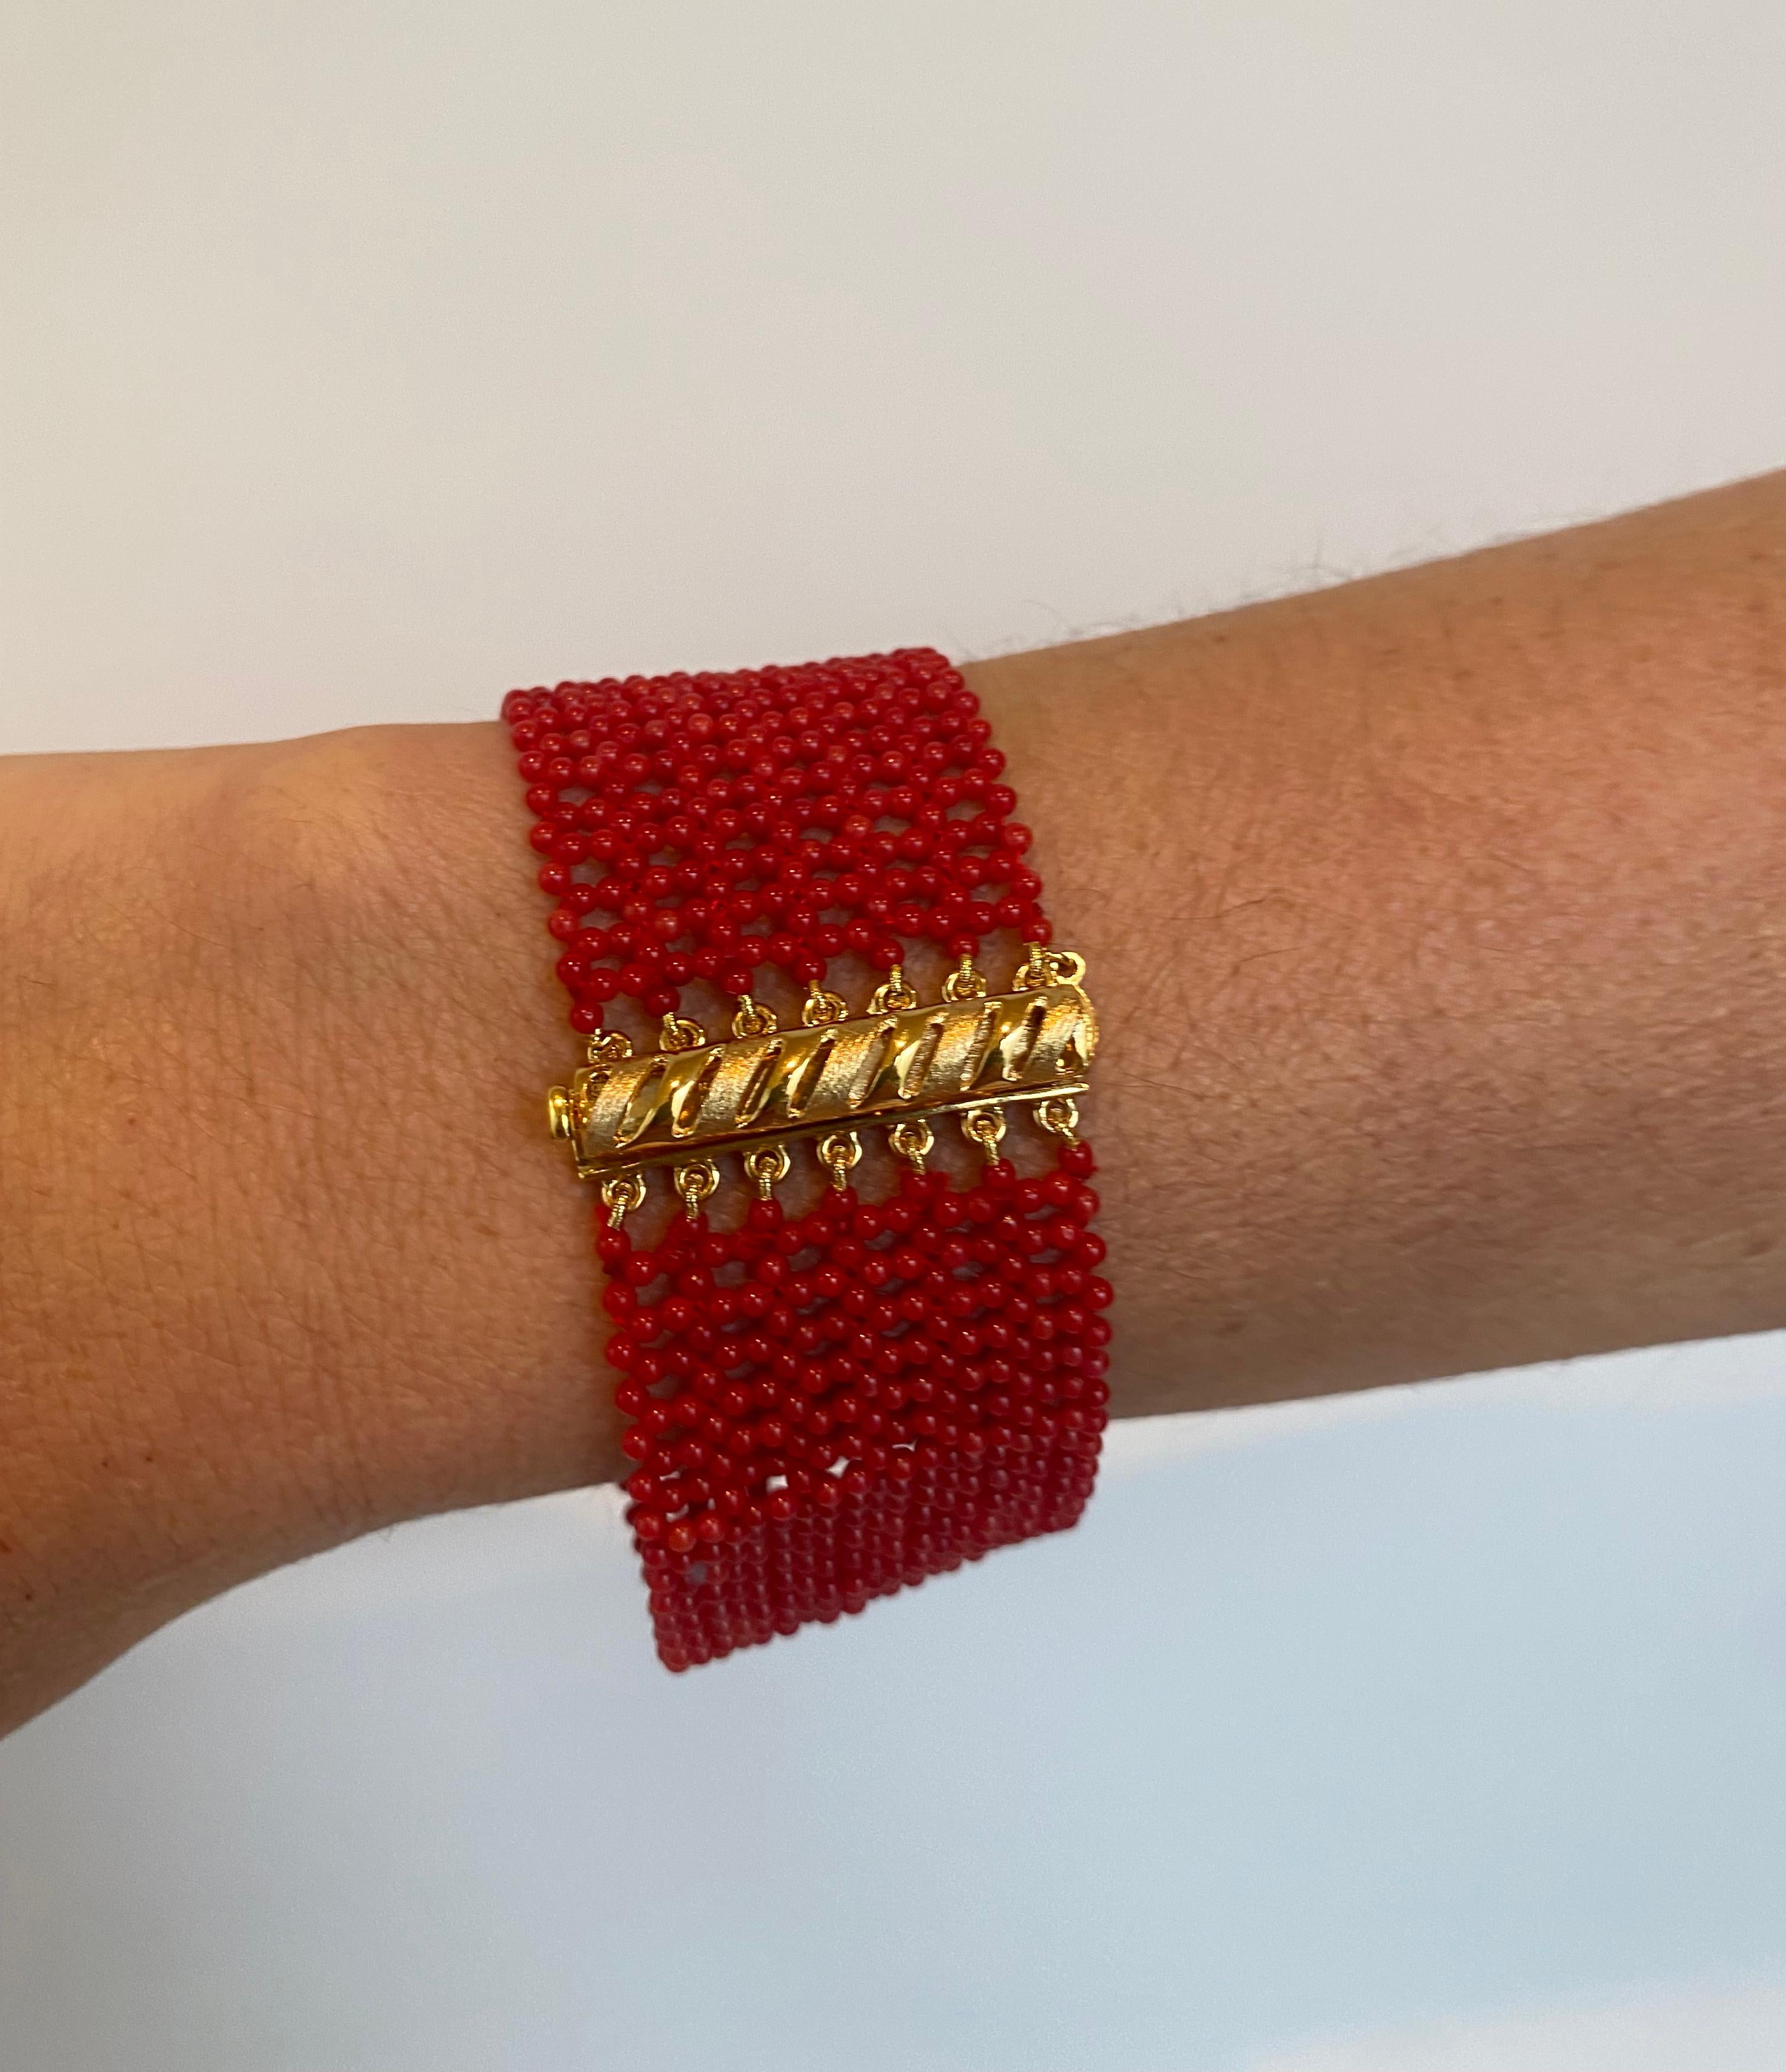 Bead Marina J. Coral Woven Bracelet with 14k Yellow Gold Plated Sterling Silver Clasp For Sale